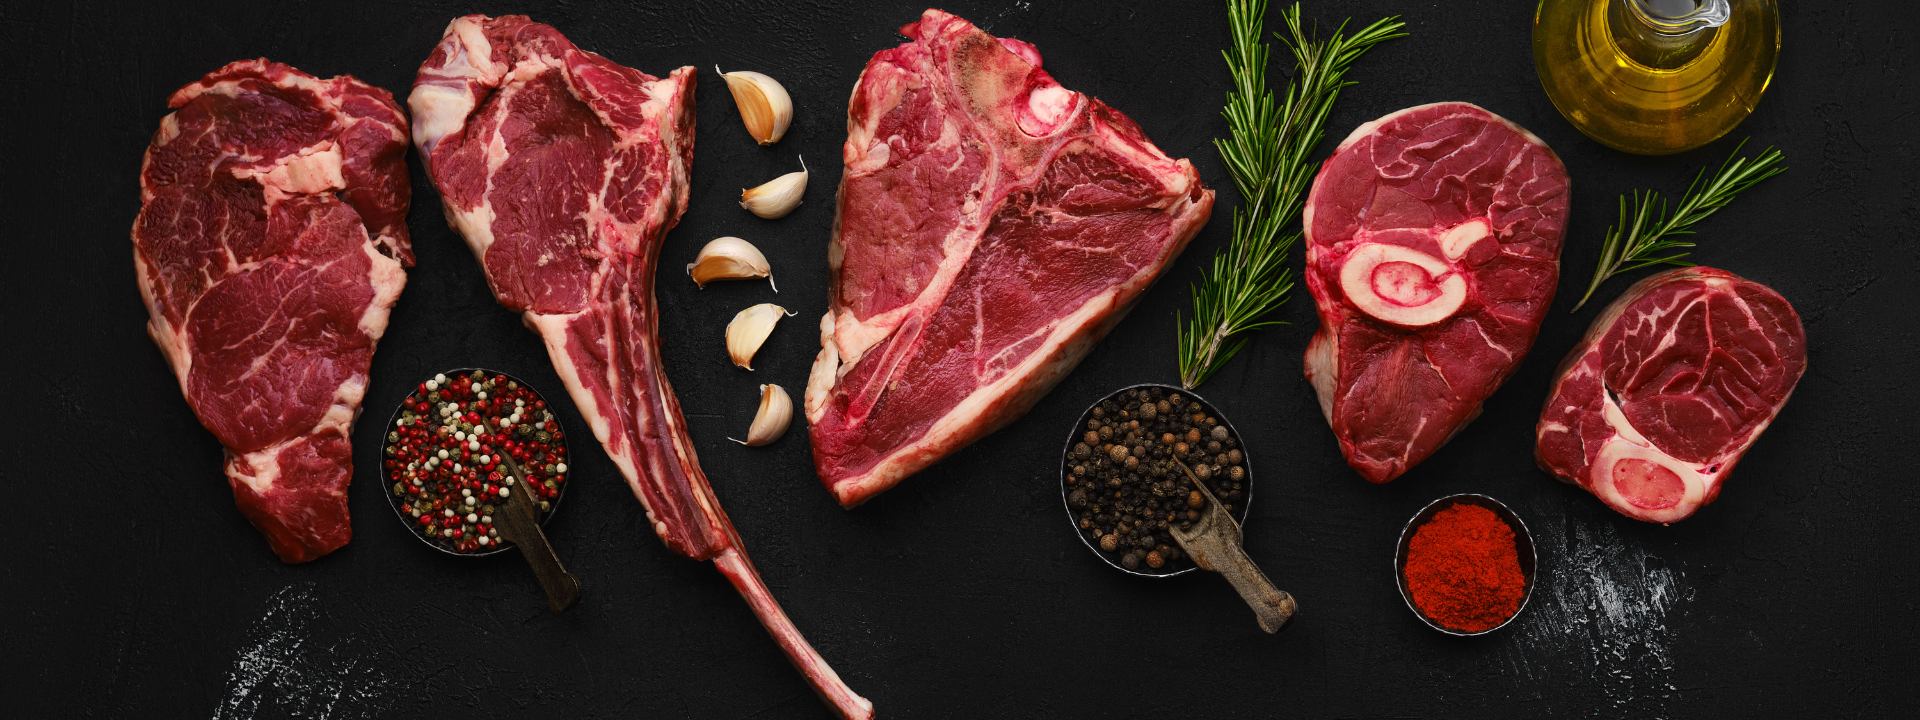 THE NUTRITIONAL BENEFITS OF GRASSFED BEEF